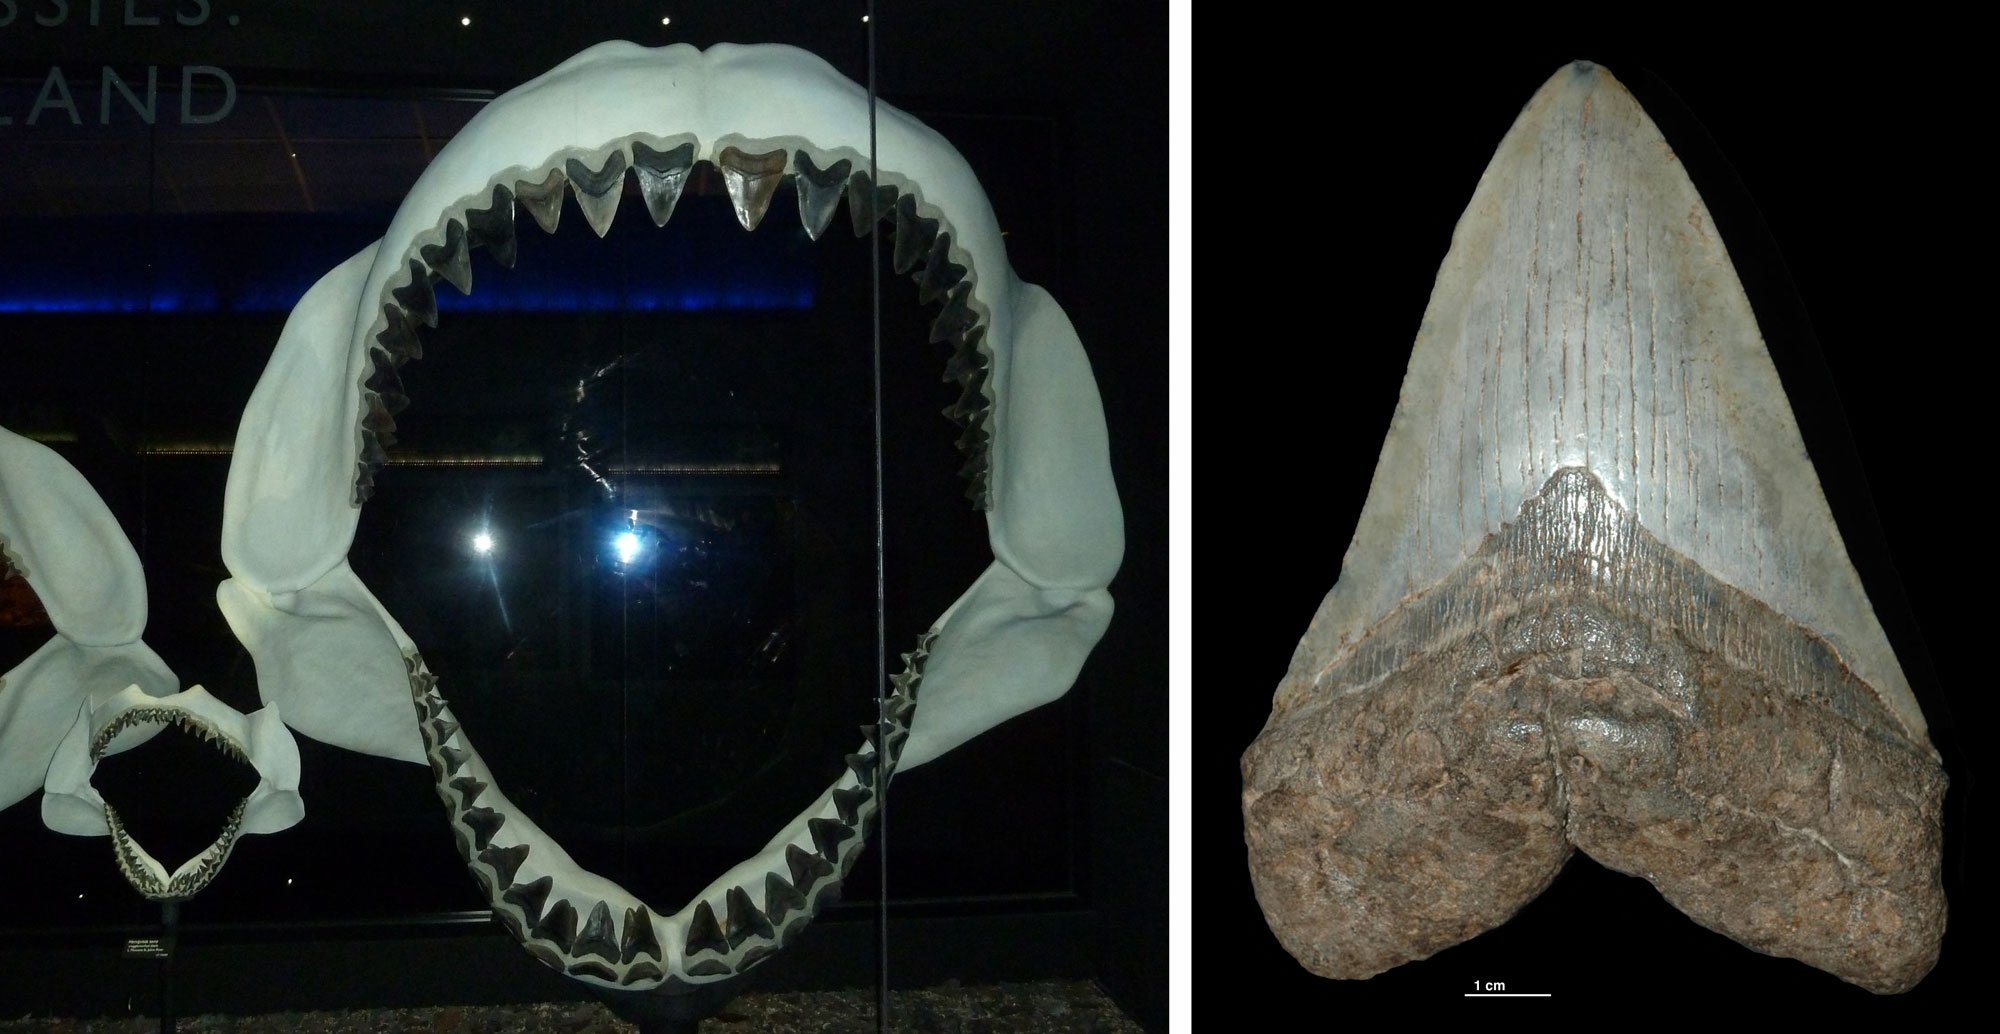 2-Panel figure of megalodon fossils. Panel 1: Reconstruction of jaws with teeth on display at the Florida Museum of Natural History. Panel 2: A single tooth from South Carolina.